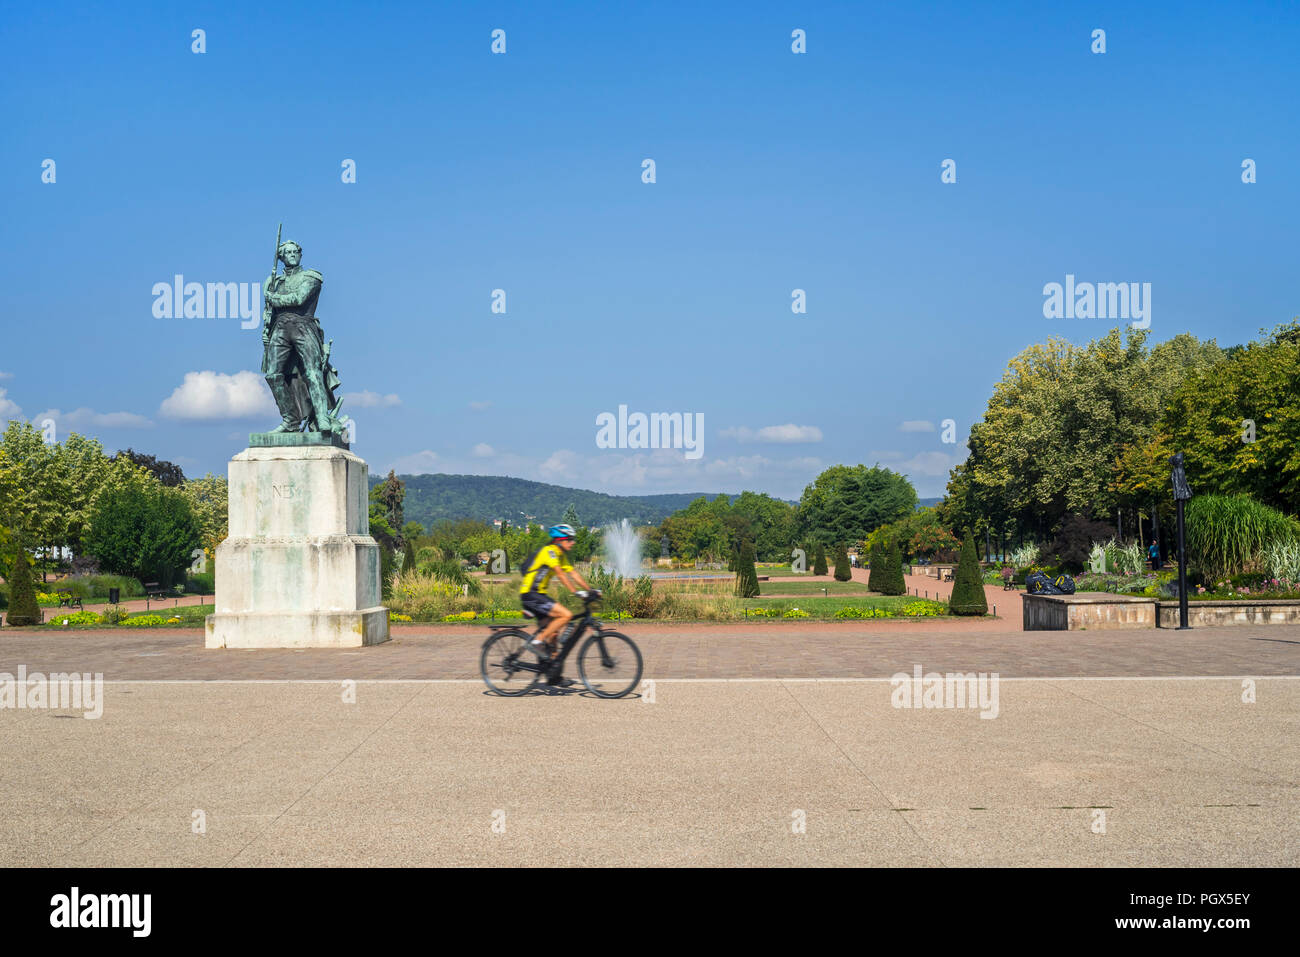 Marechal Ney monument / statue of Marshall Ney and cyclist in the Esplanade in the city Metz, Moselle, Lorraine, France Stock Photo